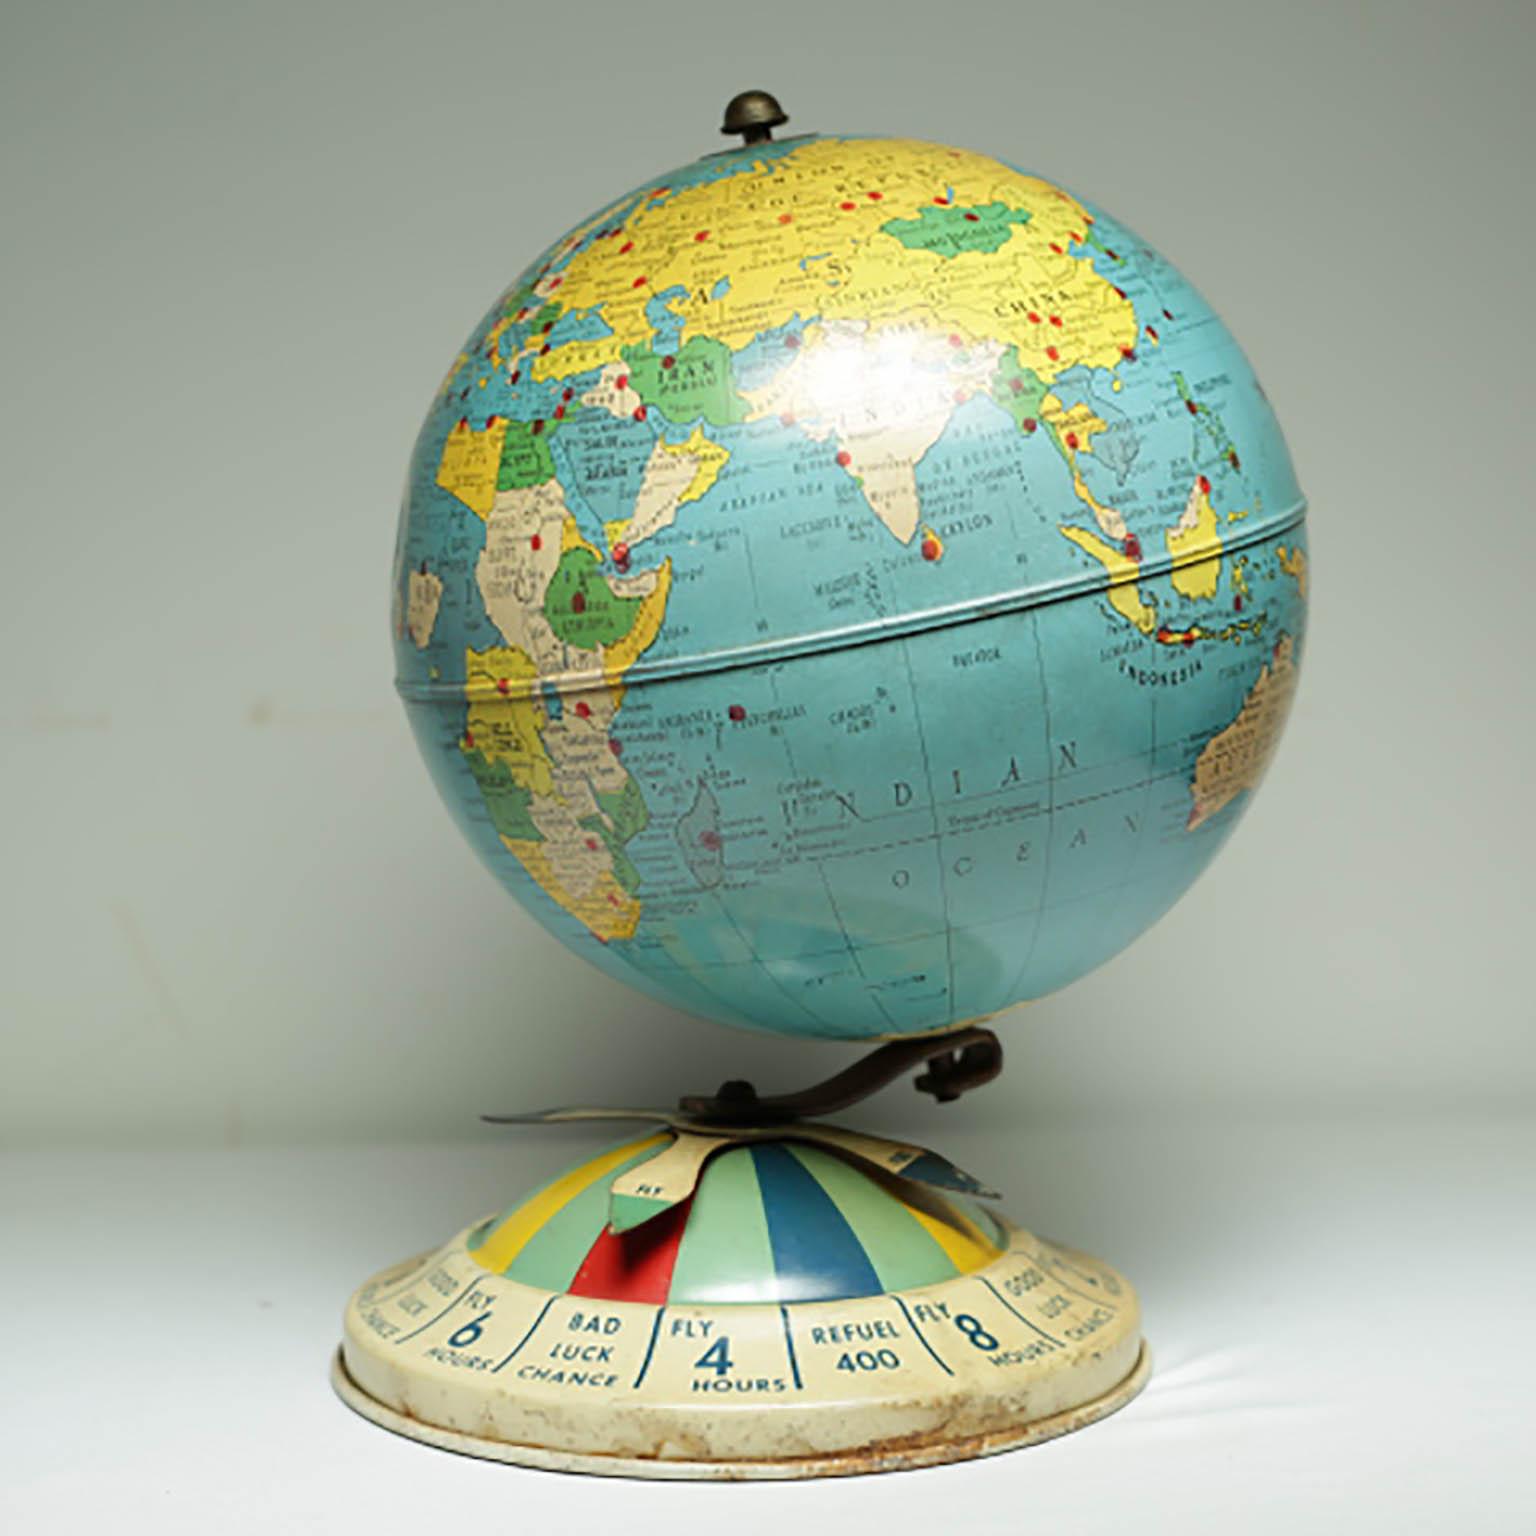 All metal globe and base with spinning dial on the base. Originally part of a air race game board that included magnetic metal planes that were placed on the red dots on the globe. 

The dial says 